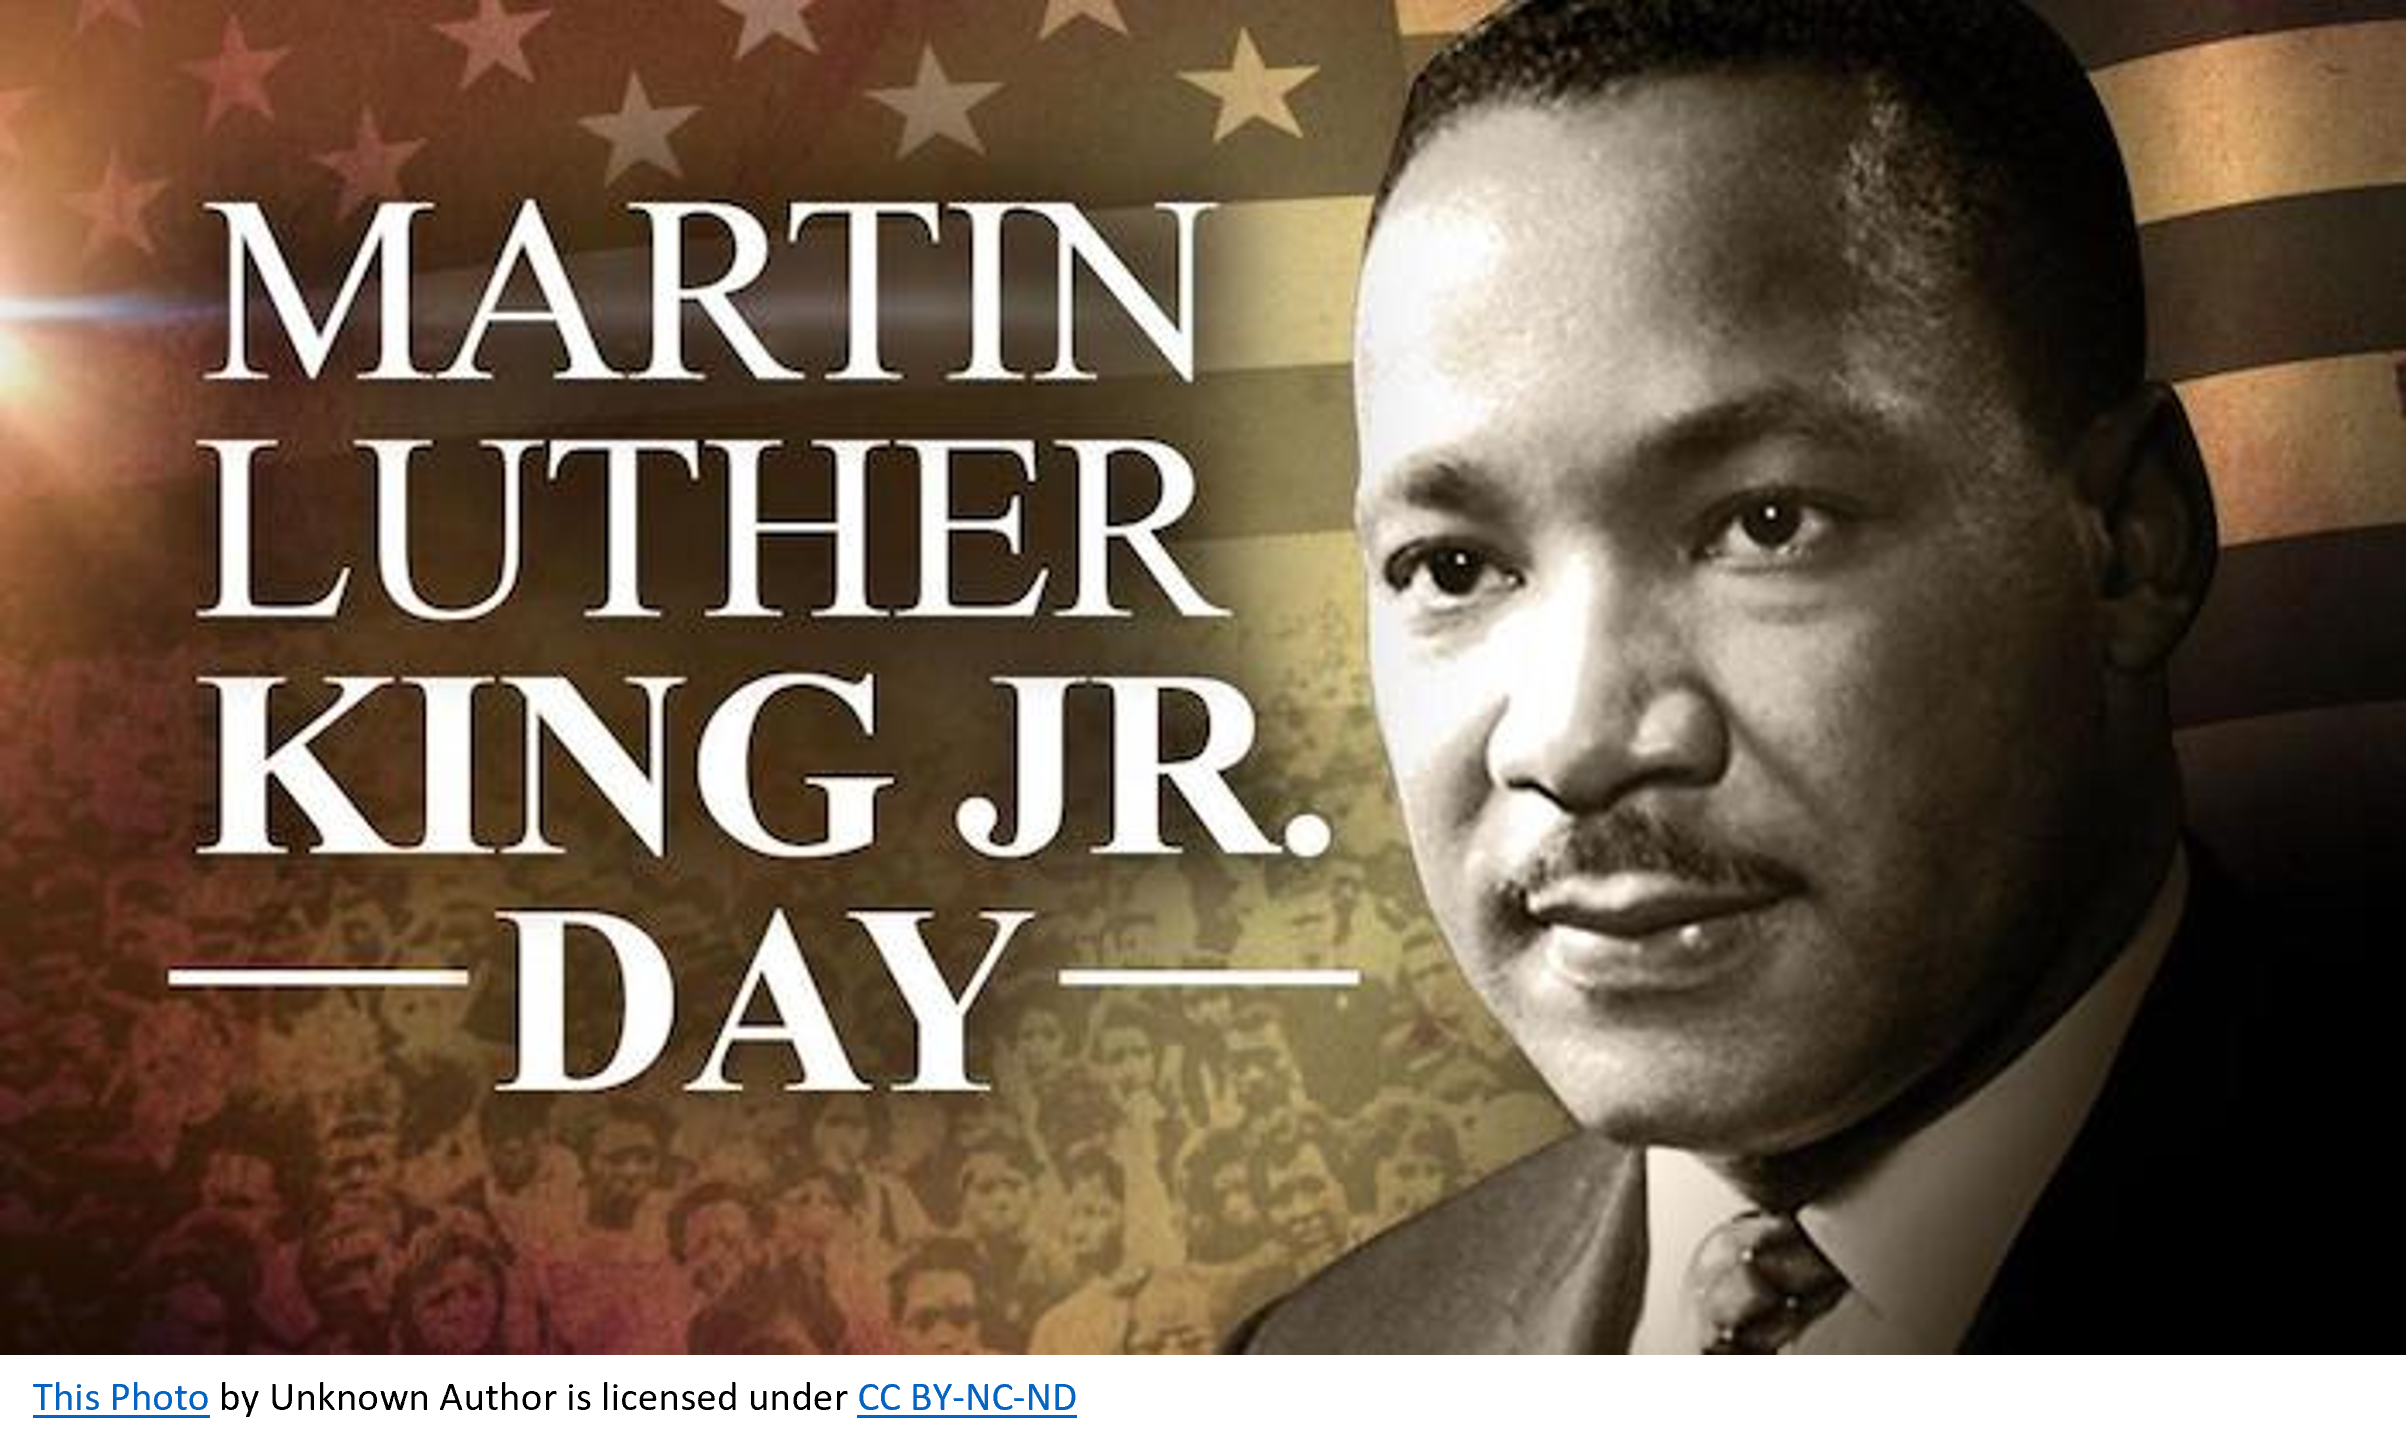 Edison Township to host ceremony honoring Martin Luther King, Jr.